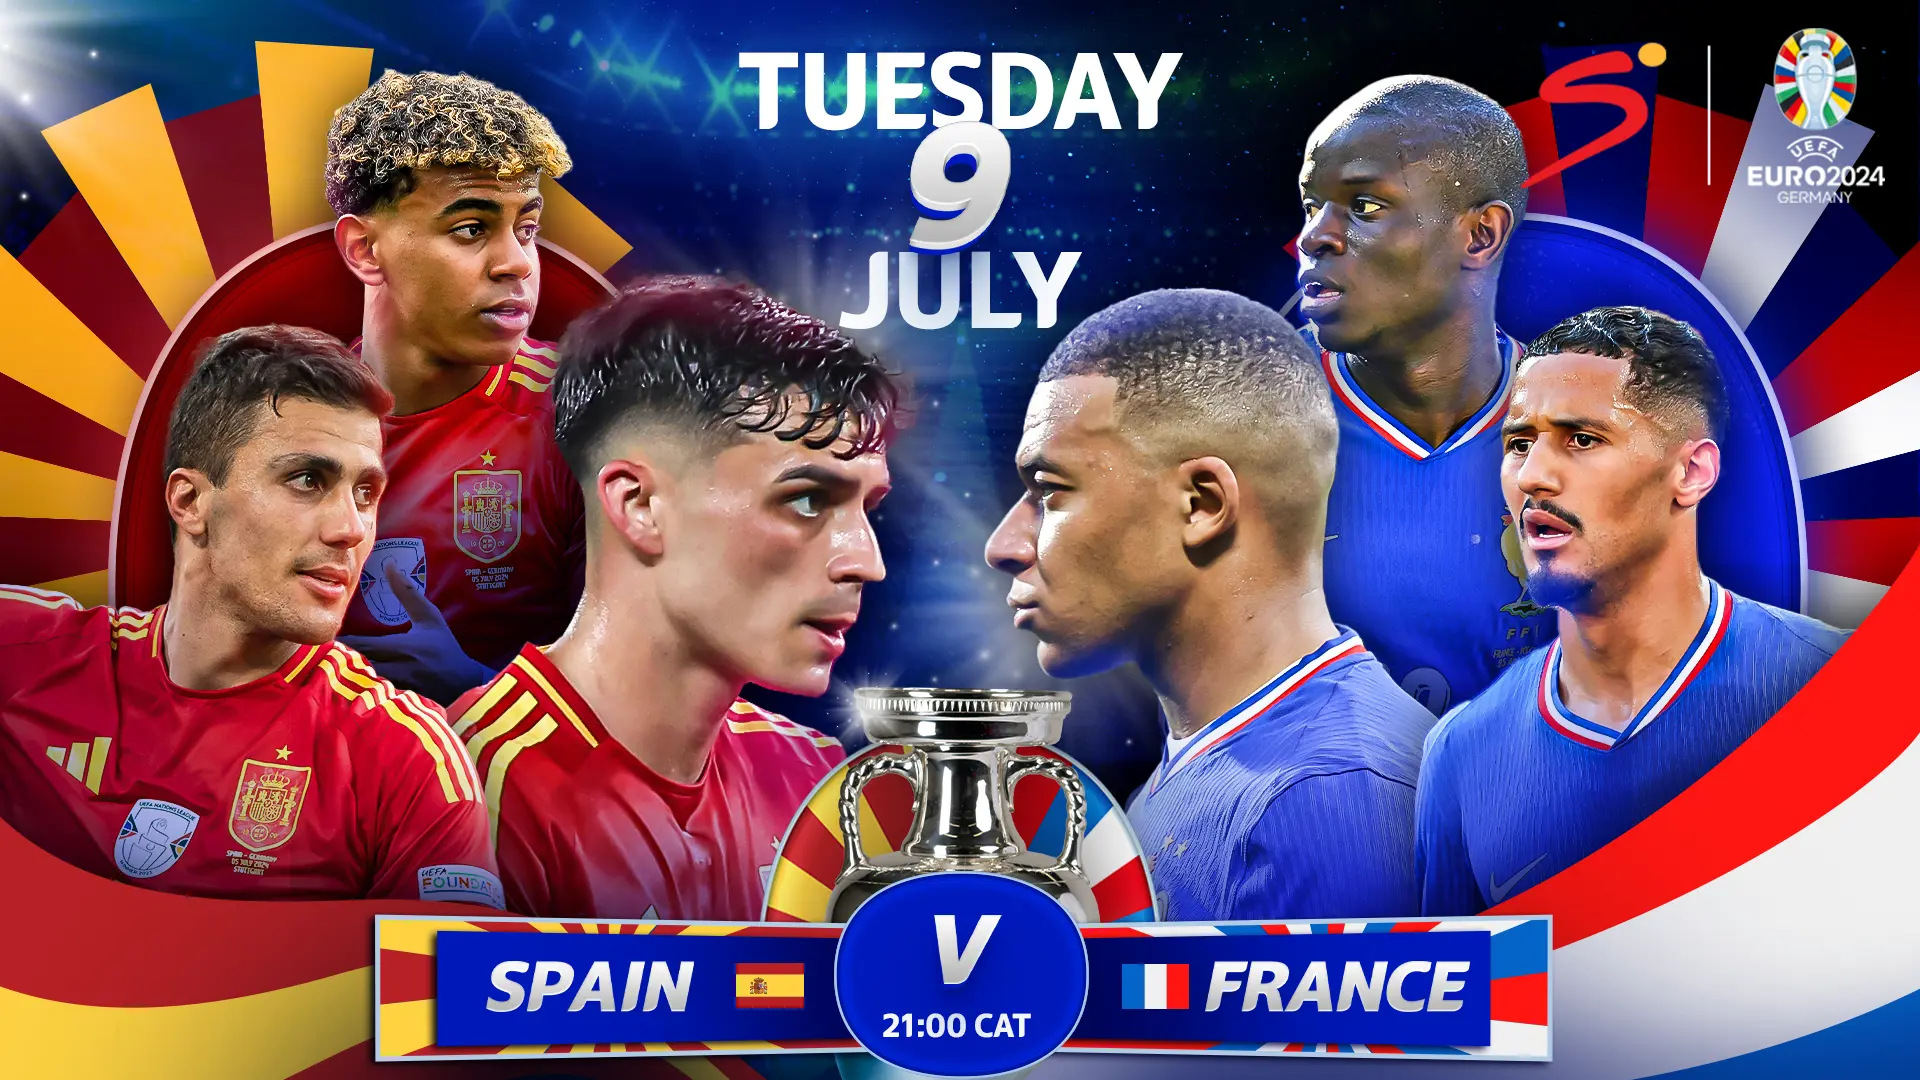 Spain vs France Live Stream, Kick-off time and TV Channel Info